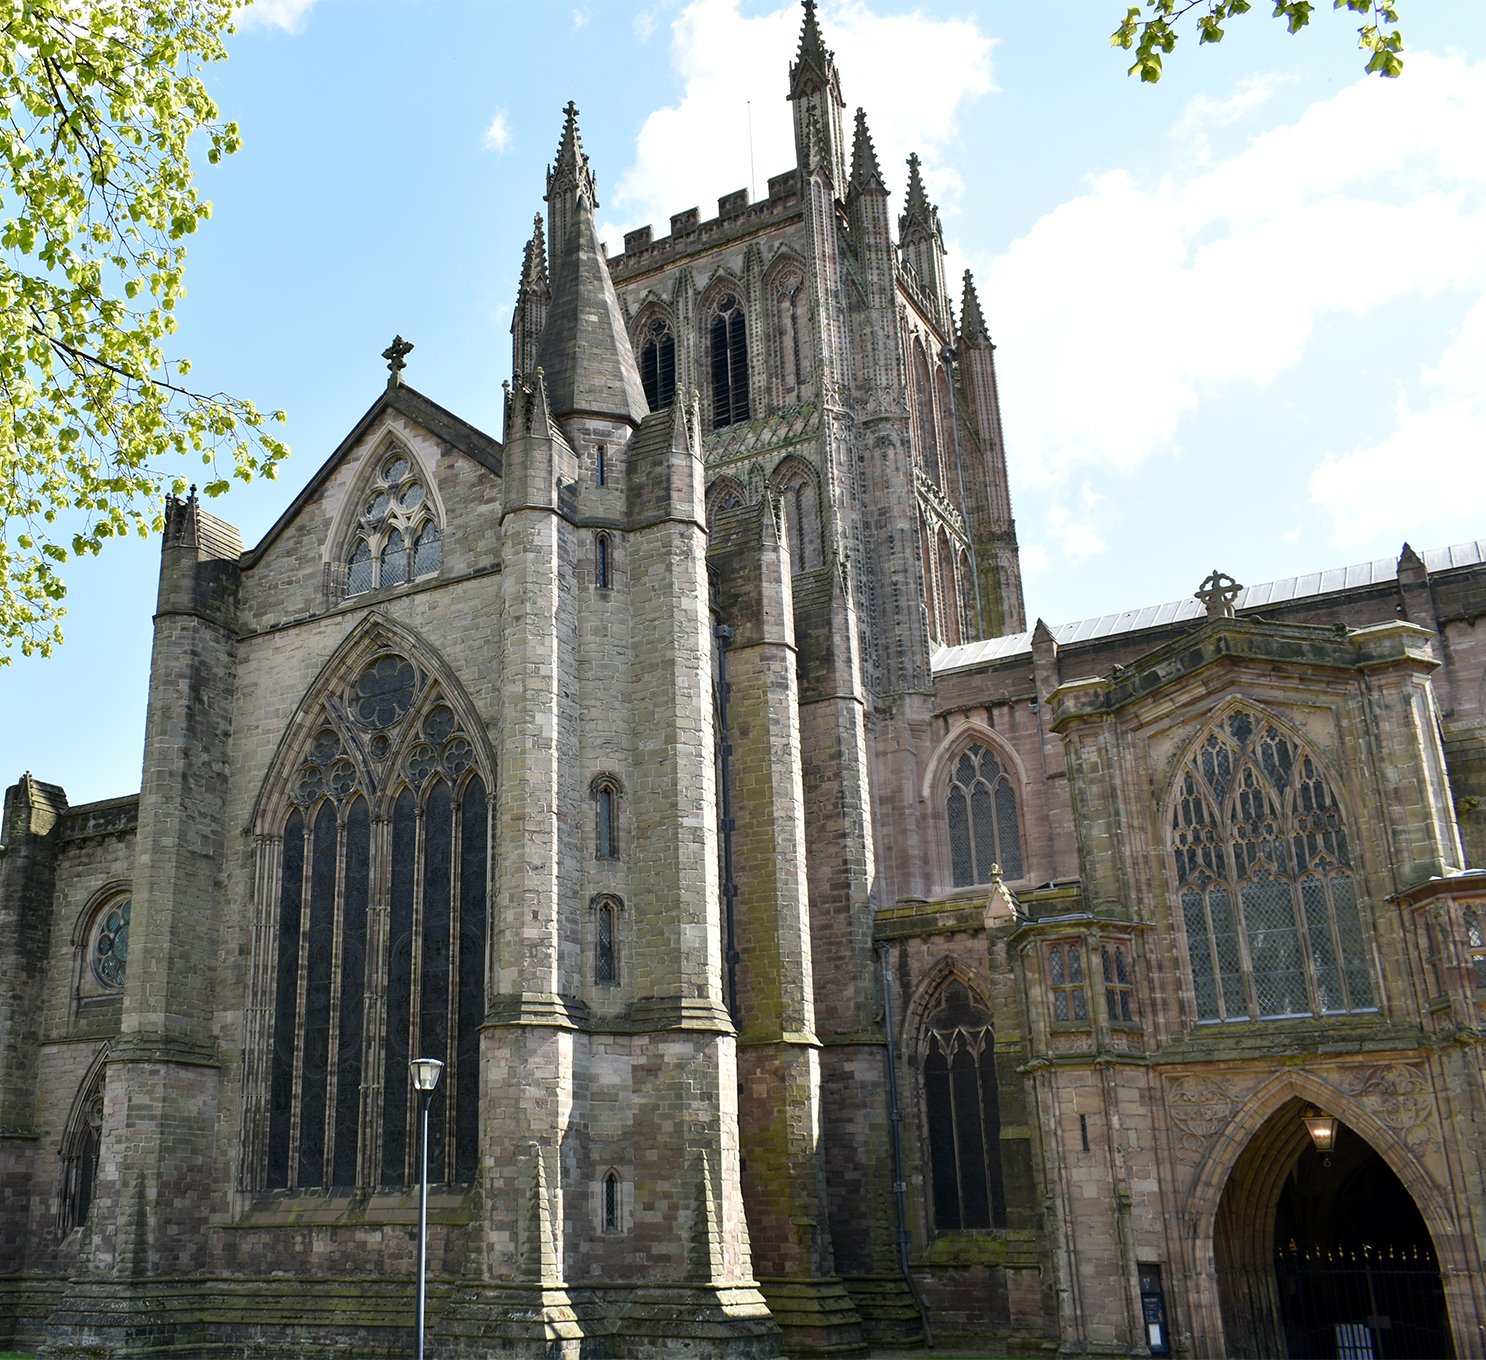 Landscape image of Hereford cathedral towers